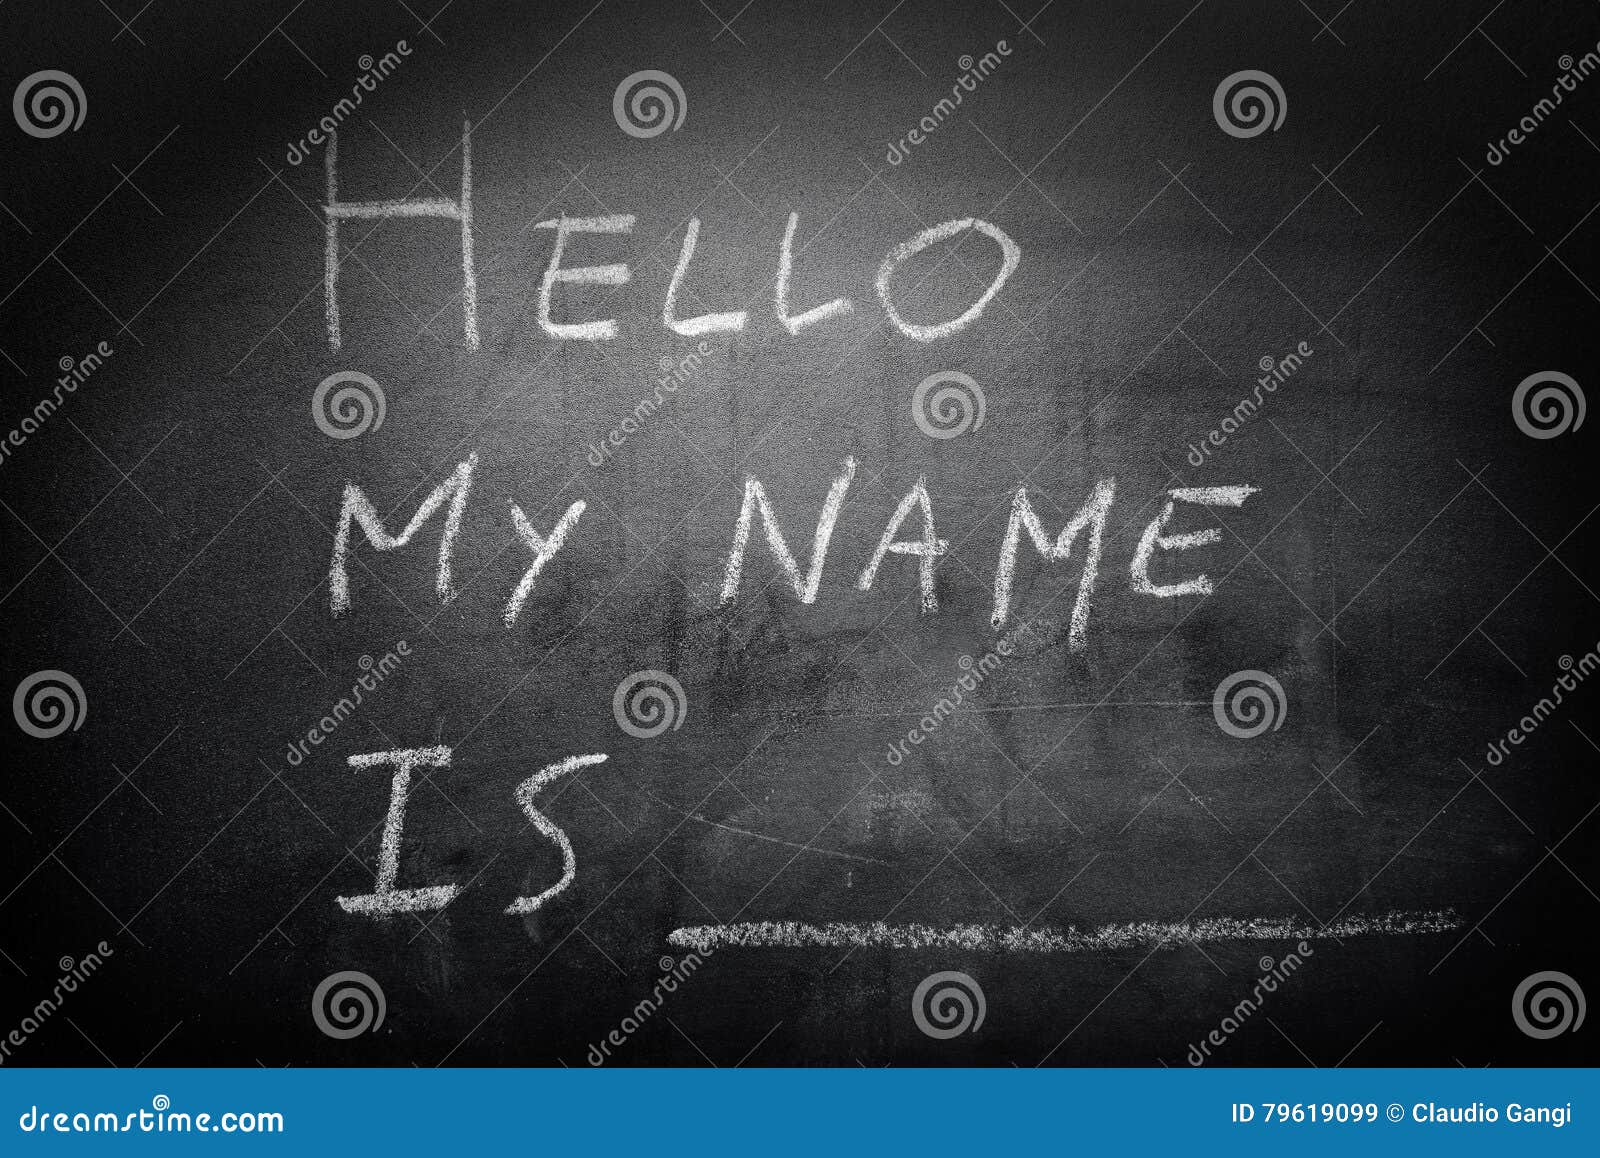 self introduction - hello, my name is ... written on a blackboard